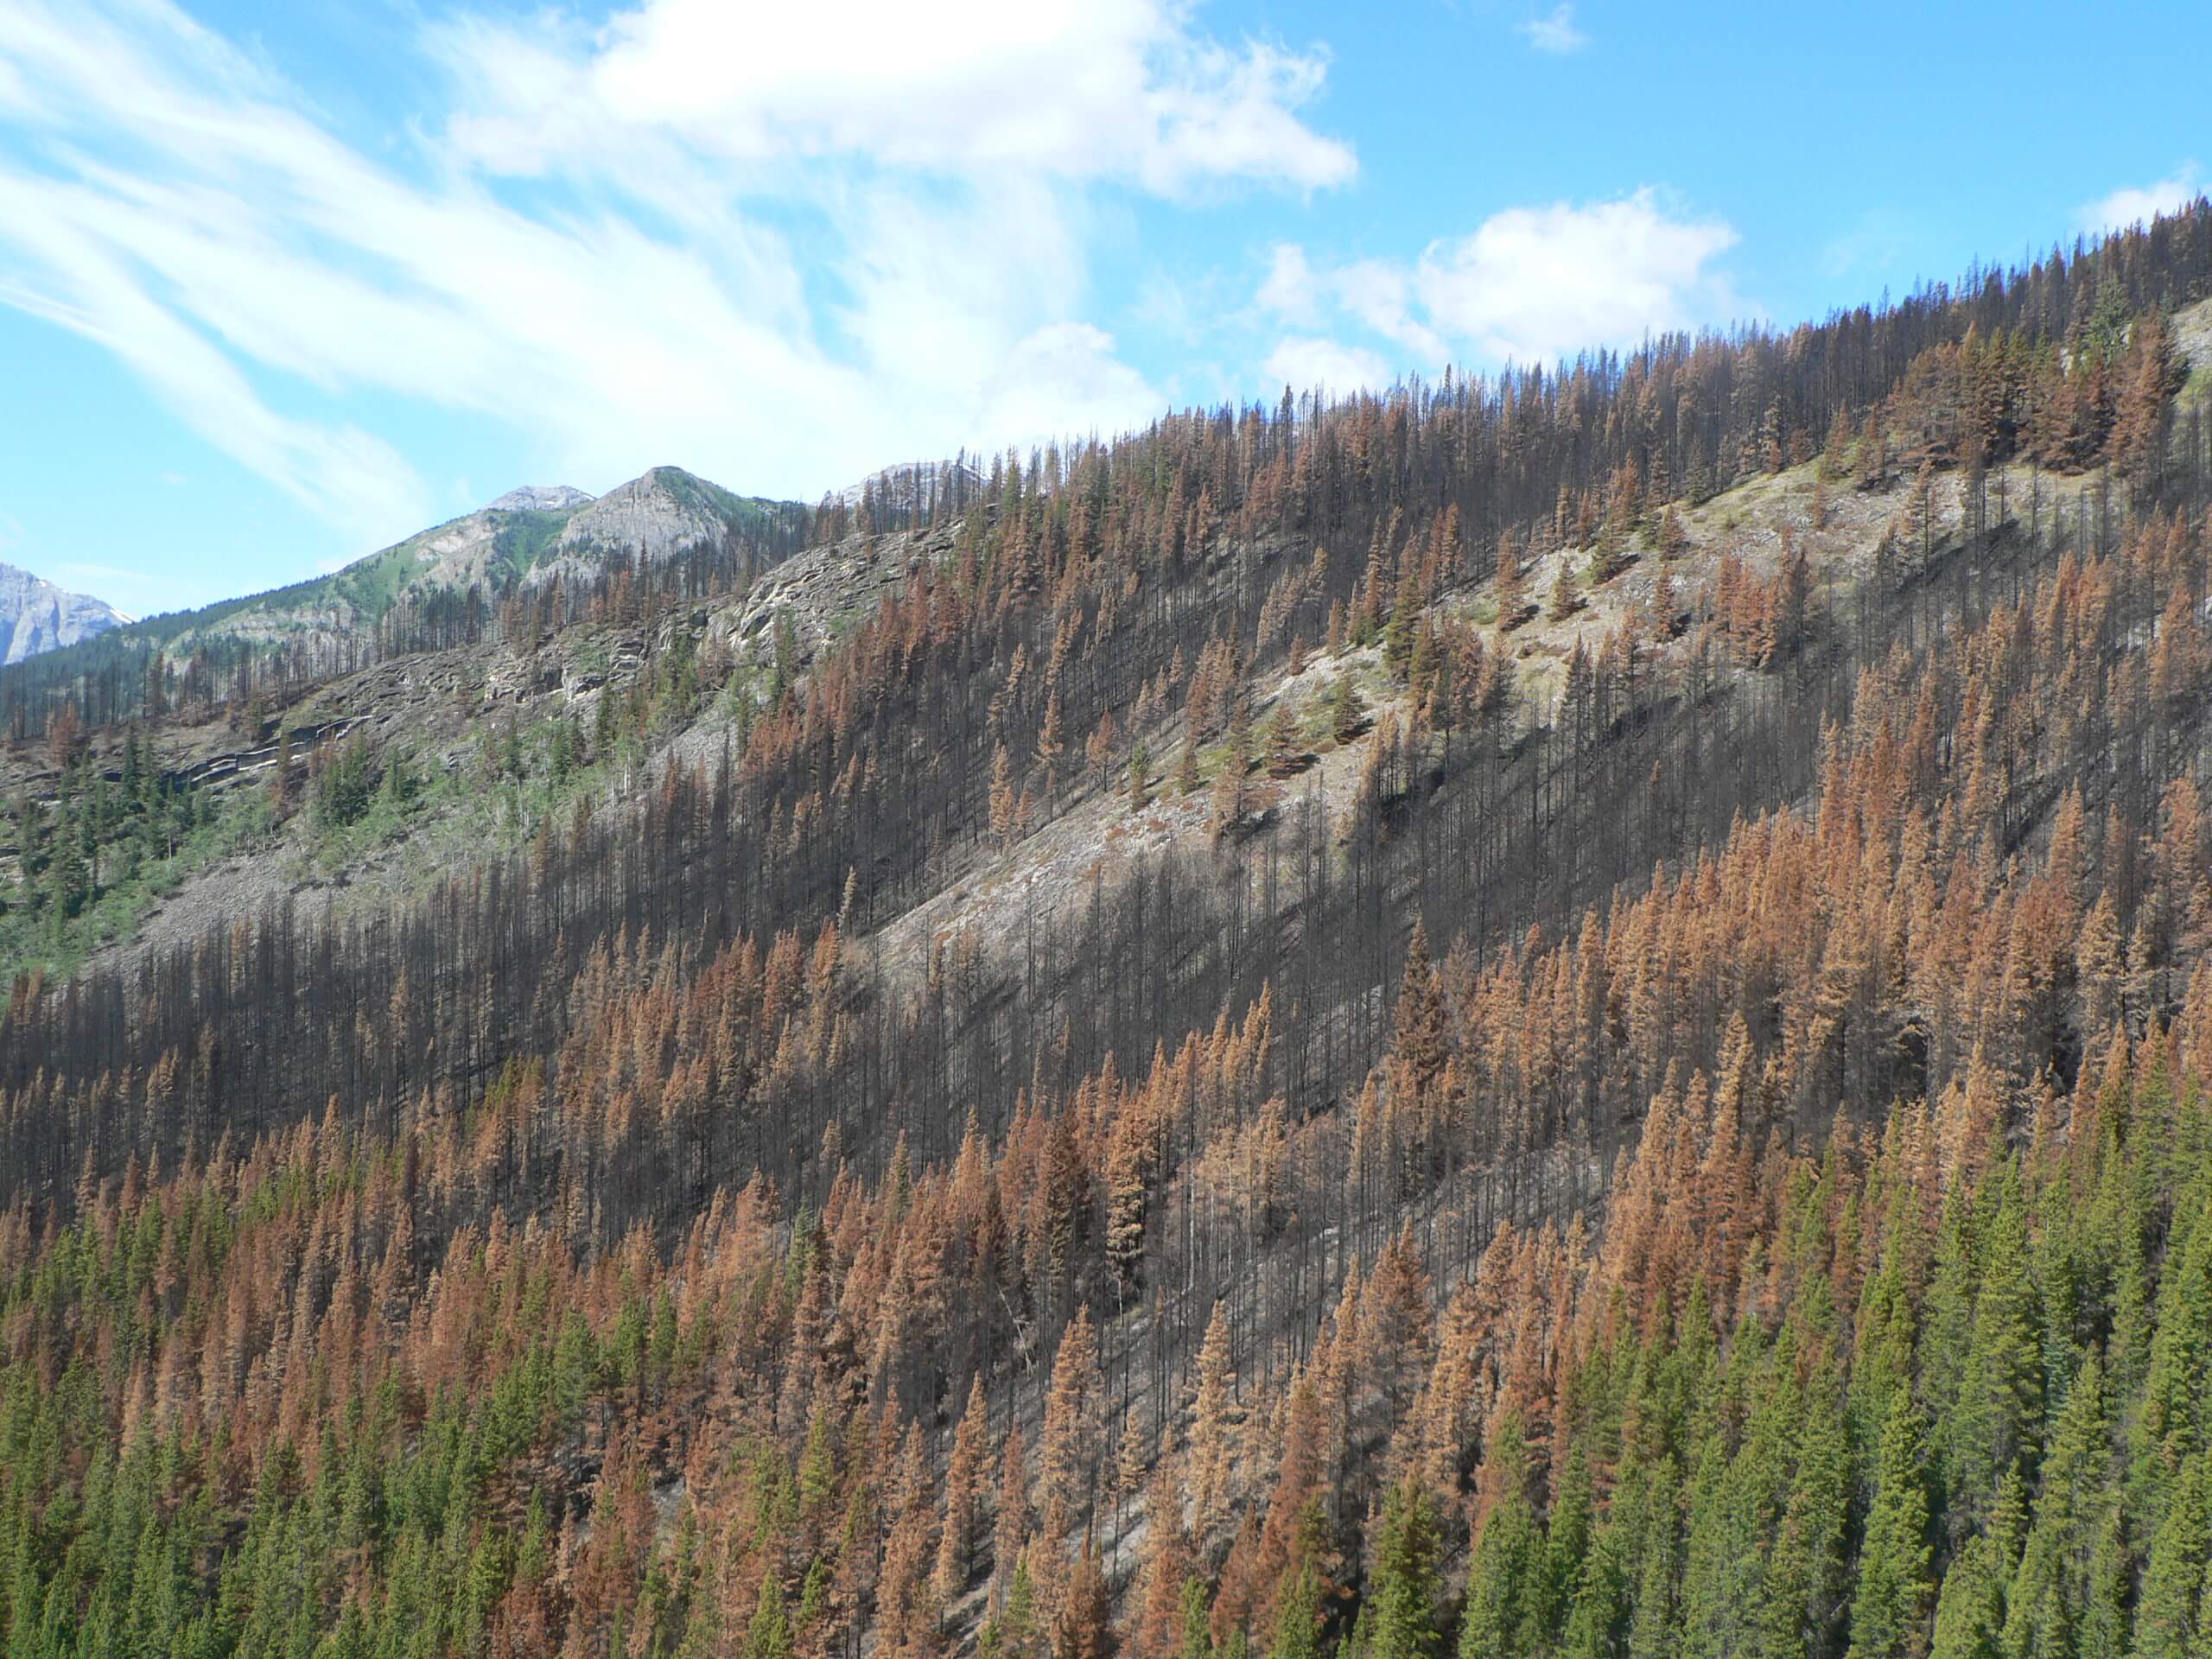 Monitoring and decision support for regeneration management in a mountain pine beetle environment